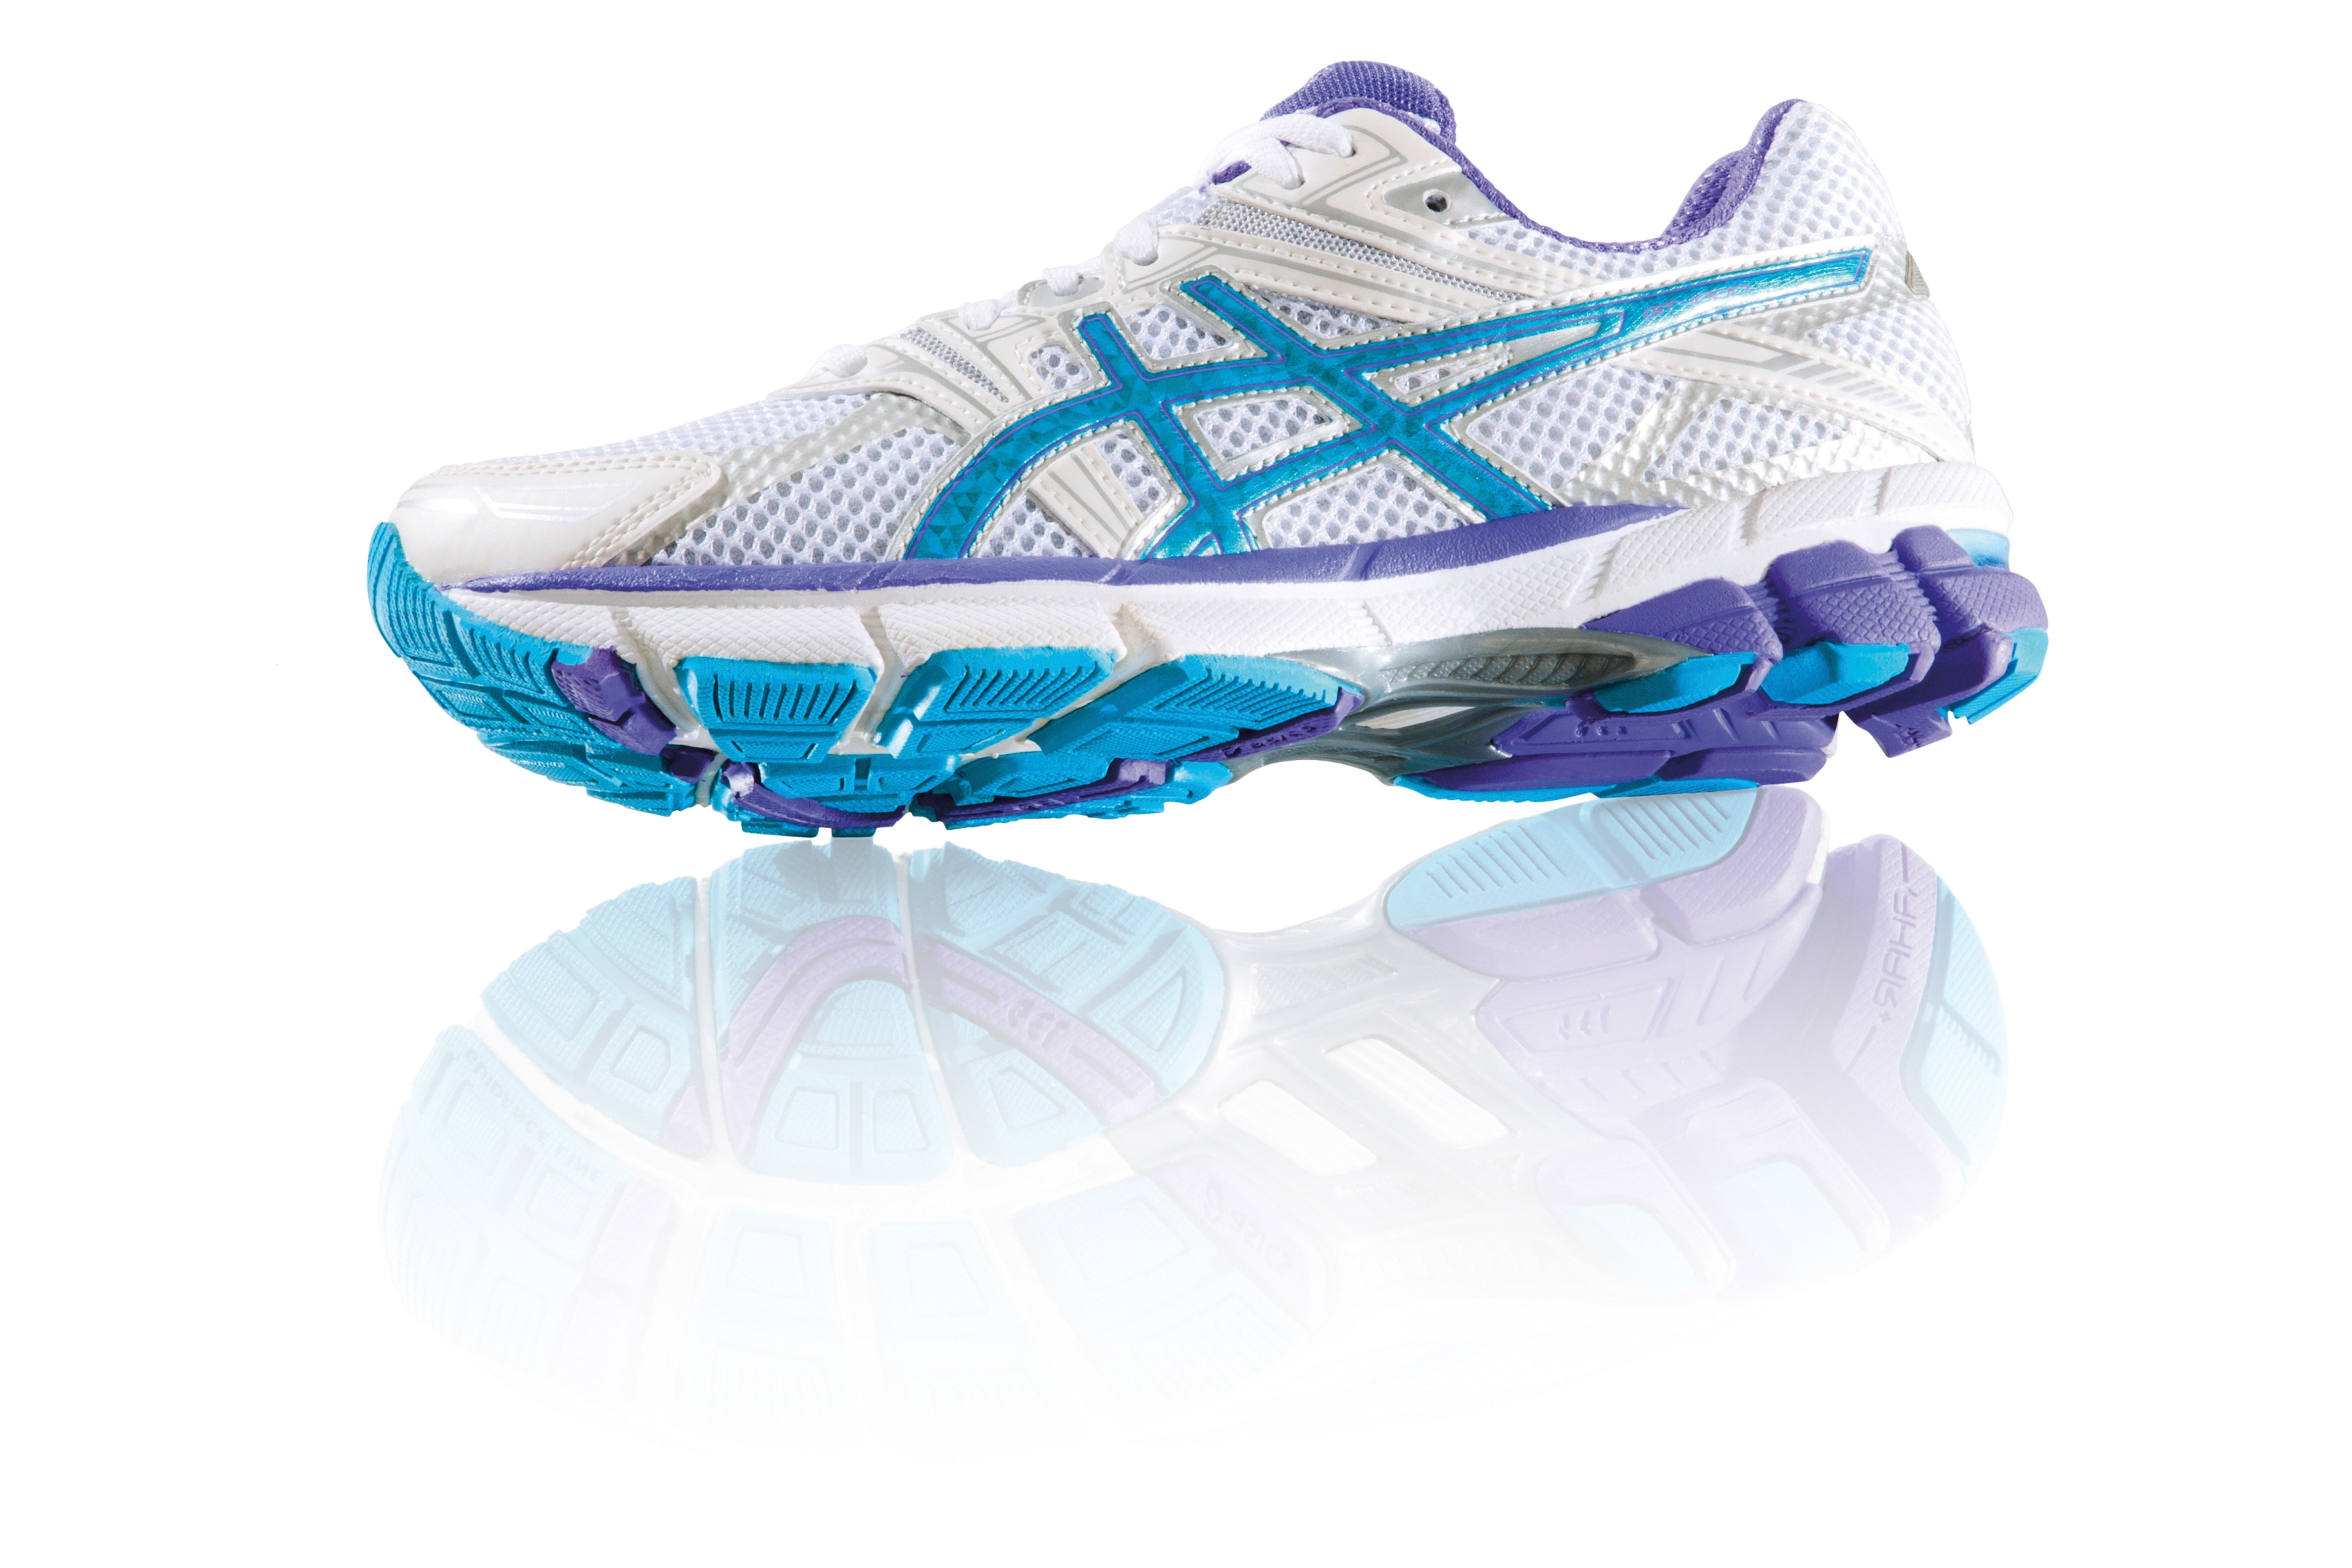 Free photo: White Blue and Purple Asics Running Shoes - Close-up ...